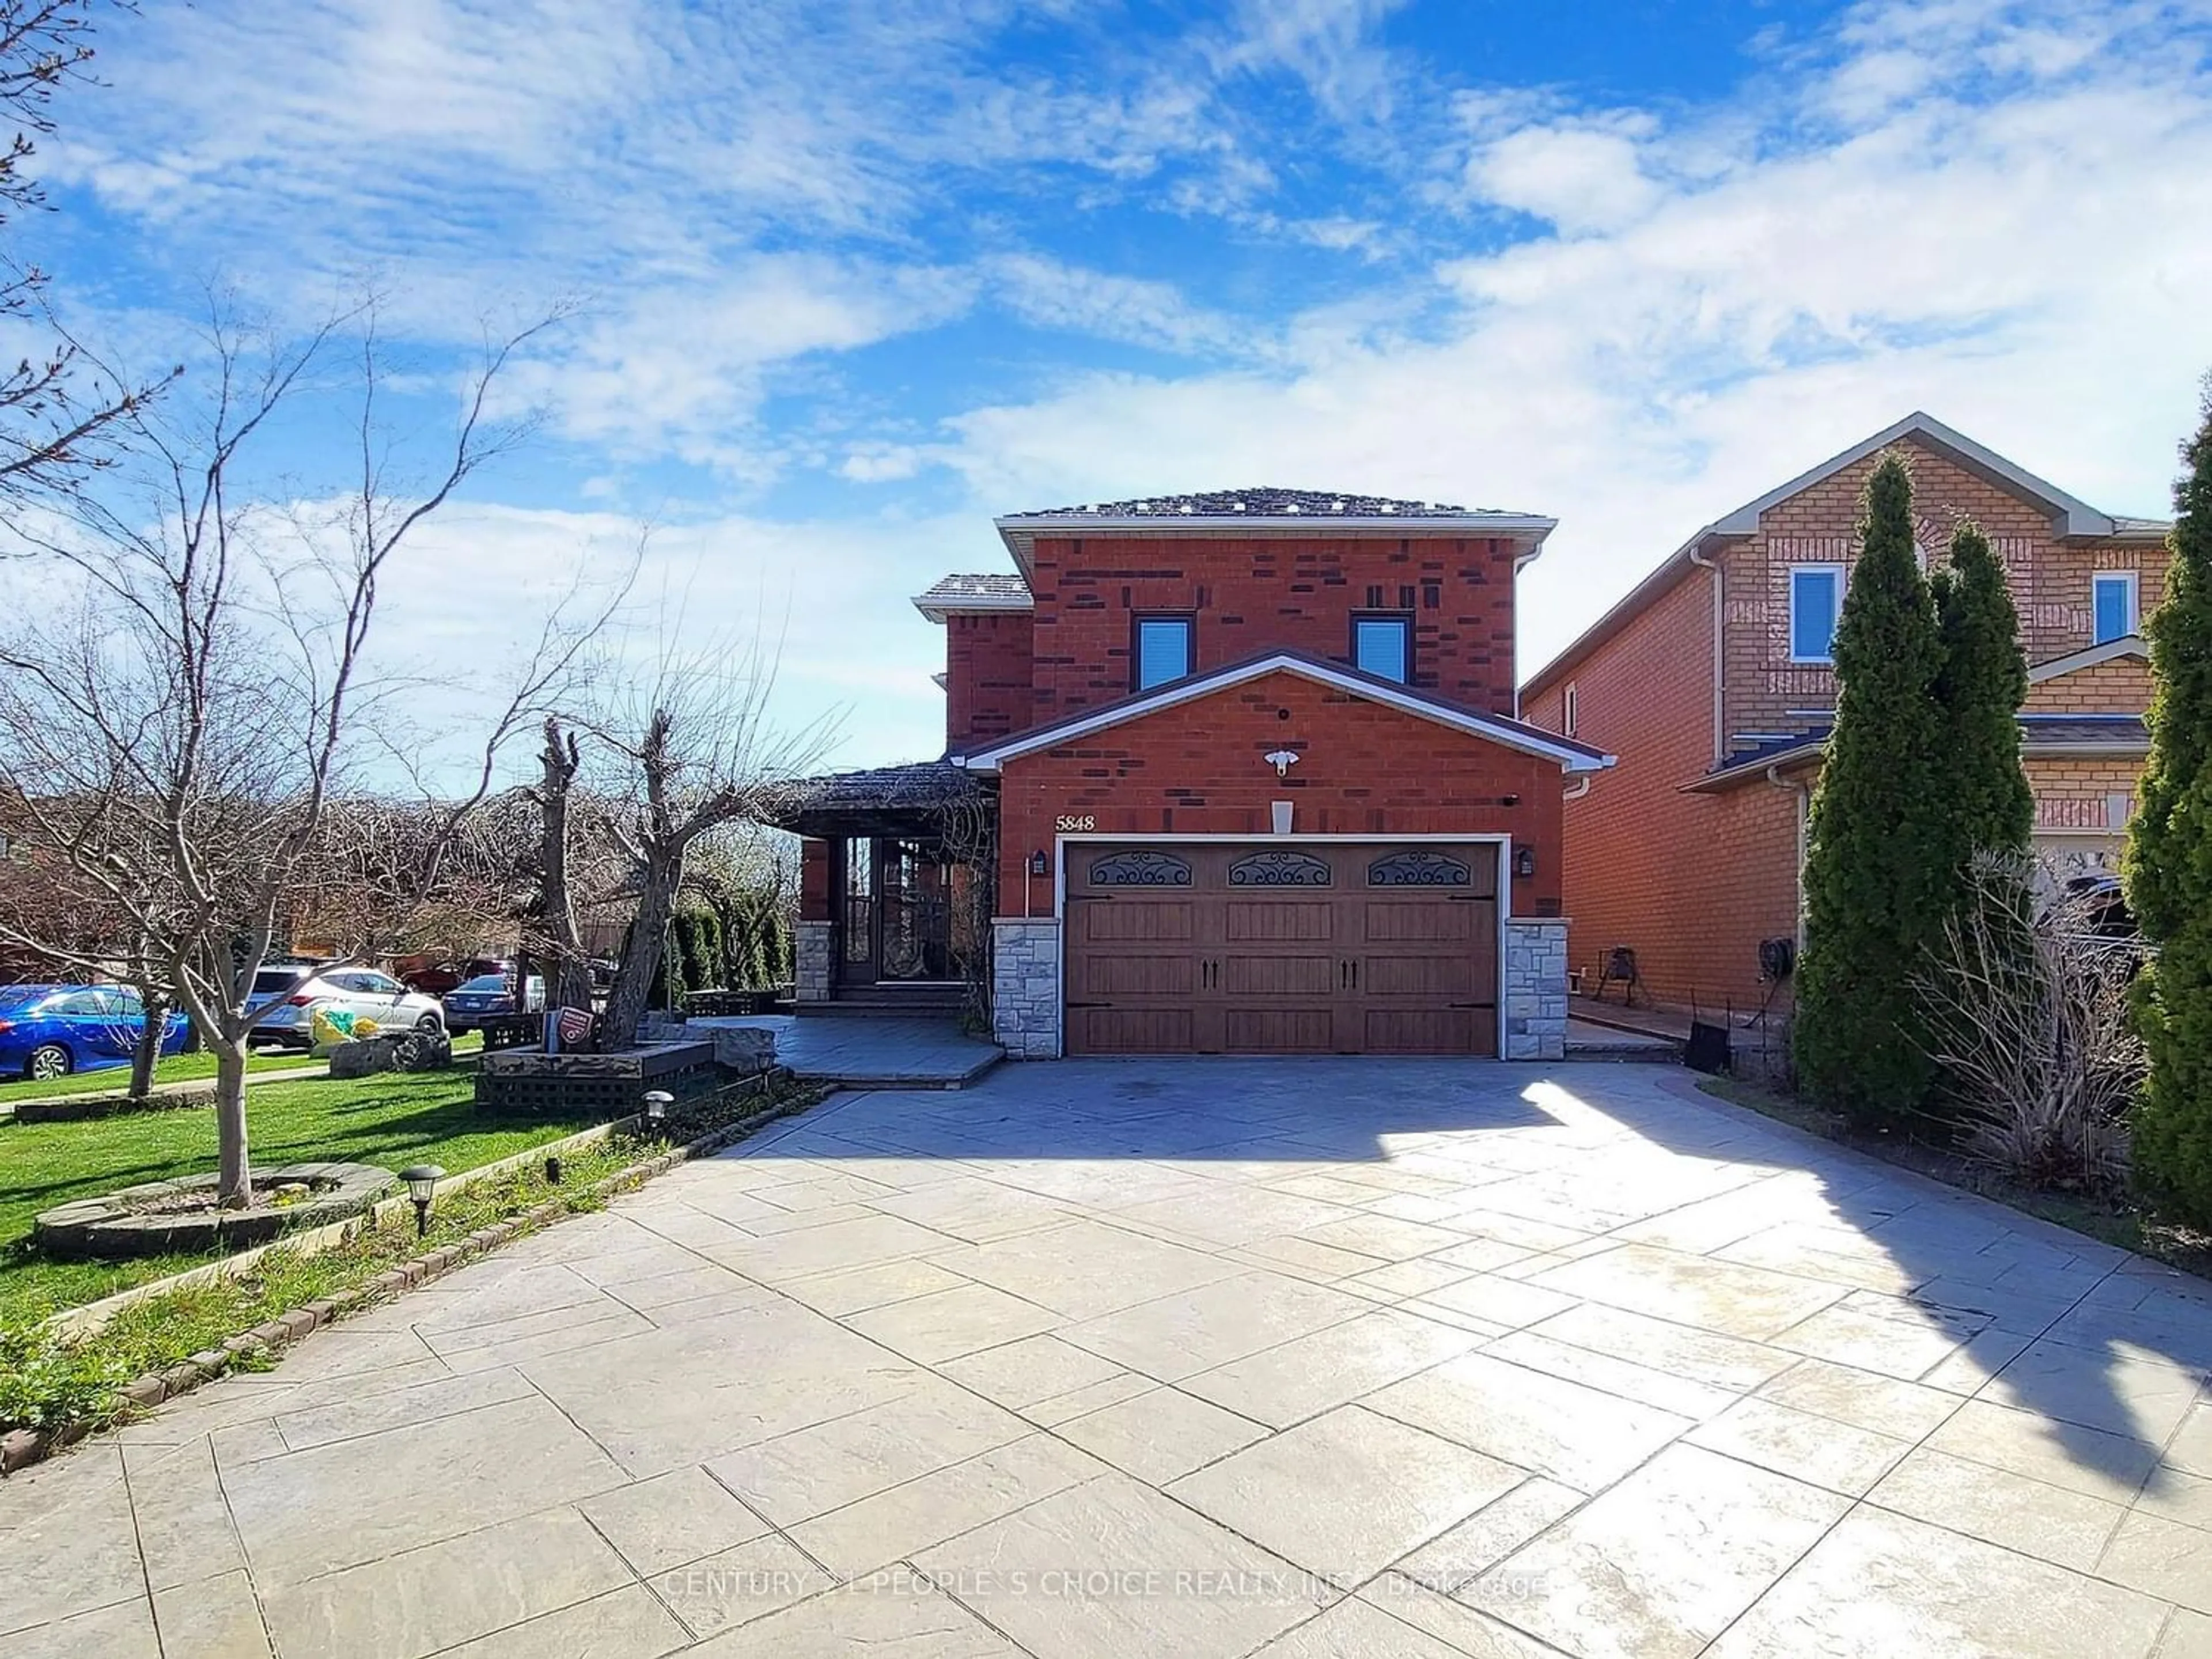 Home with brick exterior material for 5848 Sidmouth St, Mississauga Ontario L5V 2J9